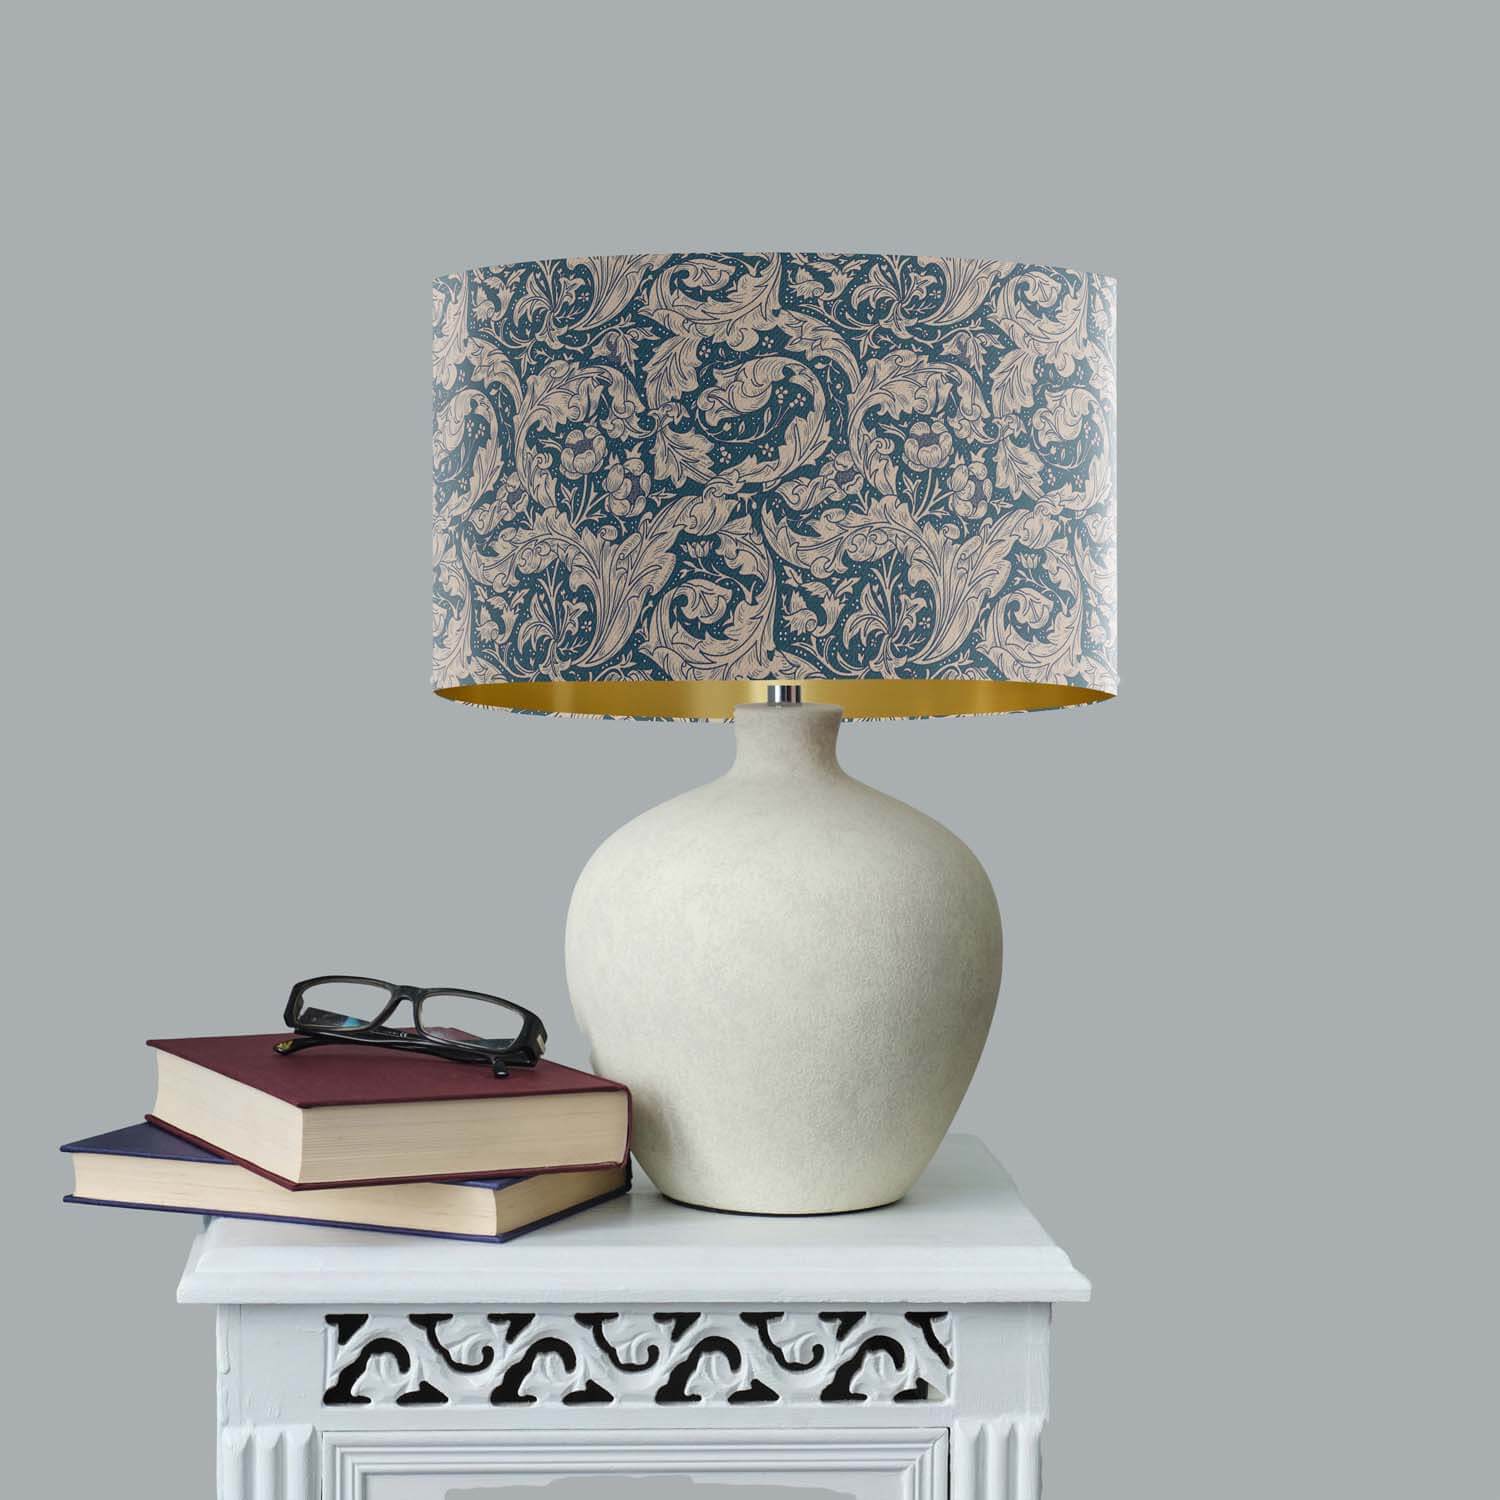 Bachelor's Buttons Provincial Blue - William Morris Gallery Lampshade